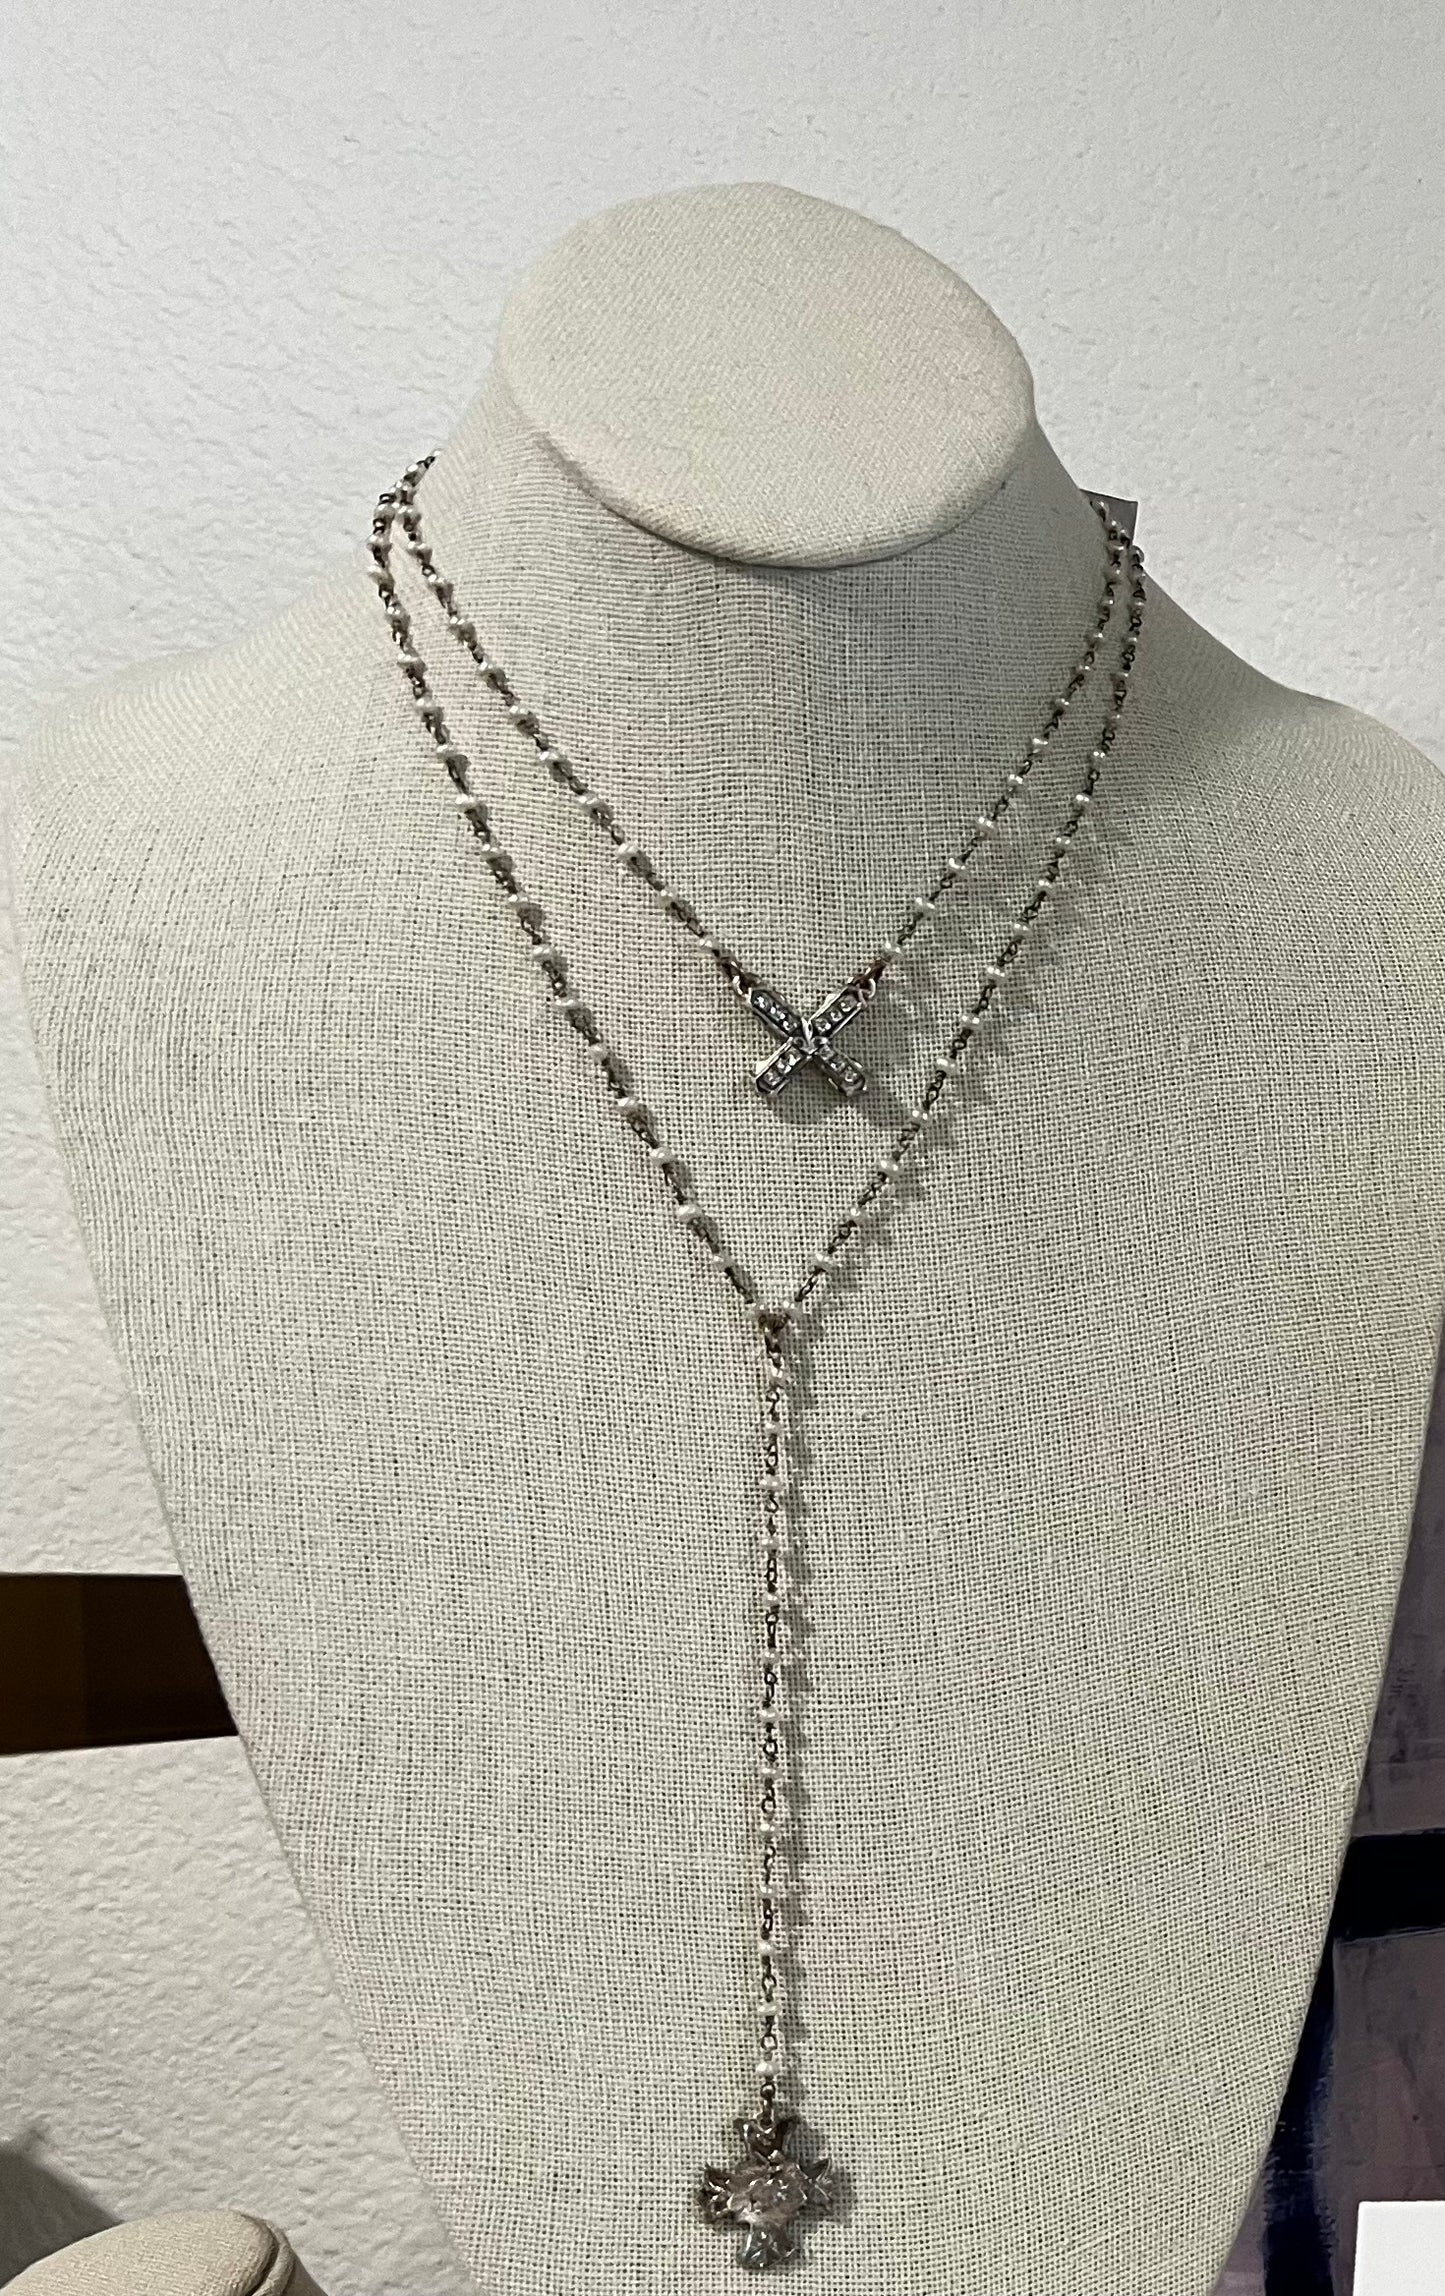 FRENCH KANDE MICRO PEARL FRENCH KISS NECKLACE - SILVER